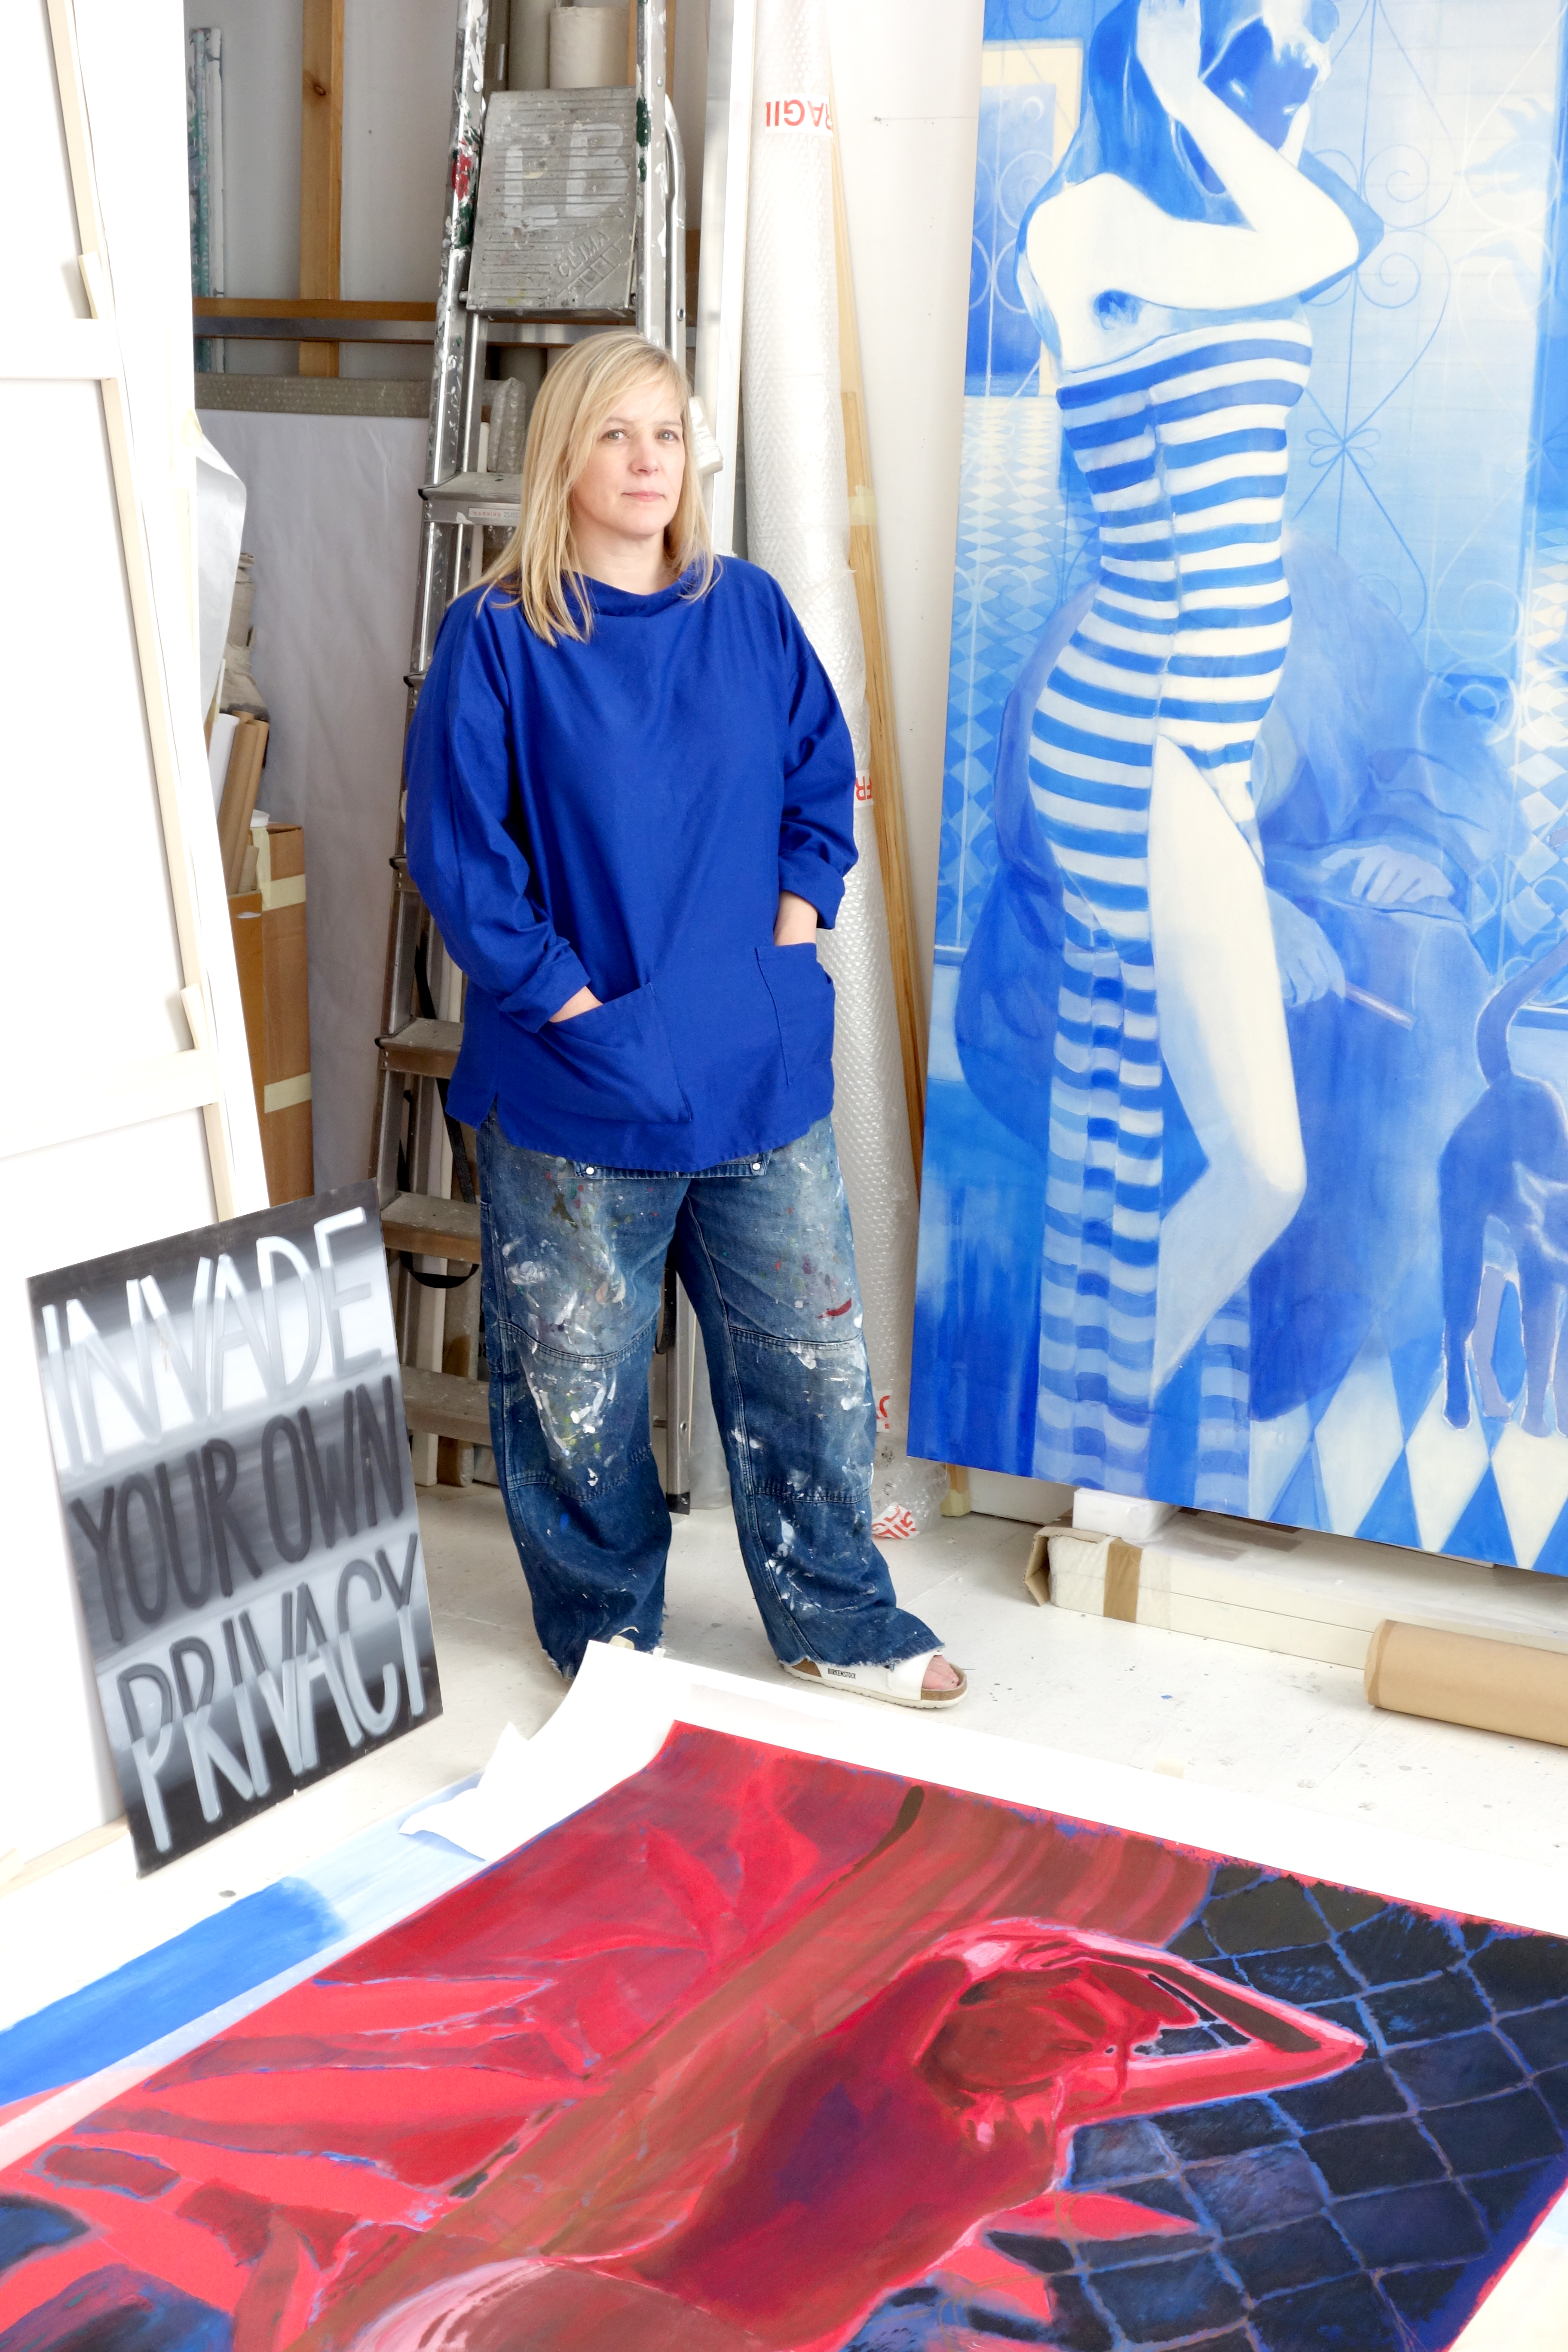 Lisa Brice in her studio in London with Between This and That, 2017, right, and Boundary Girl (Natalie), 2009-2017, foreground.